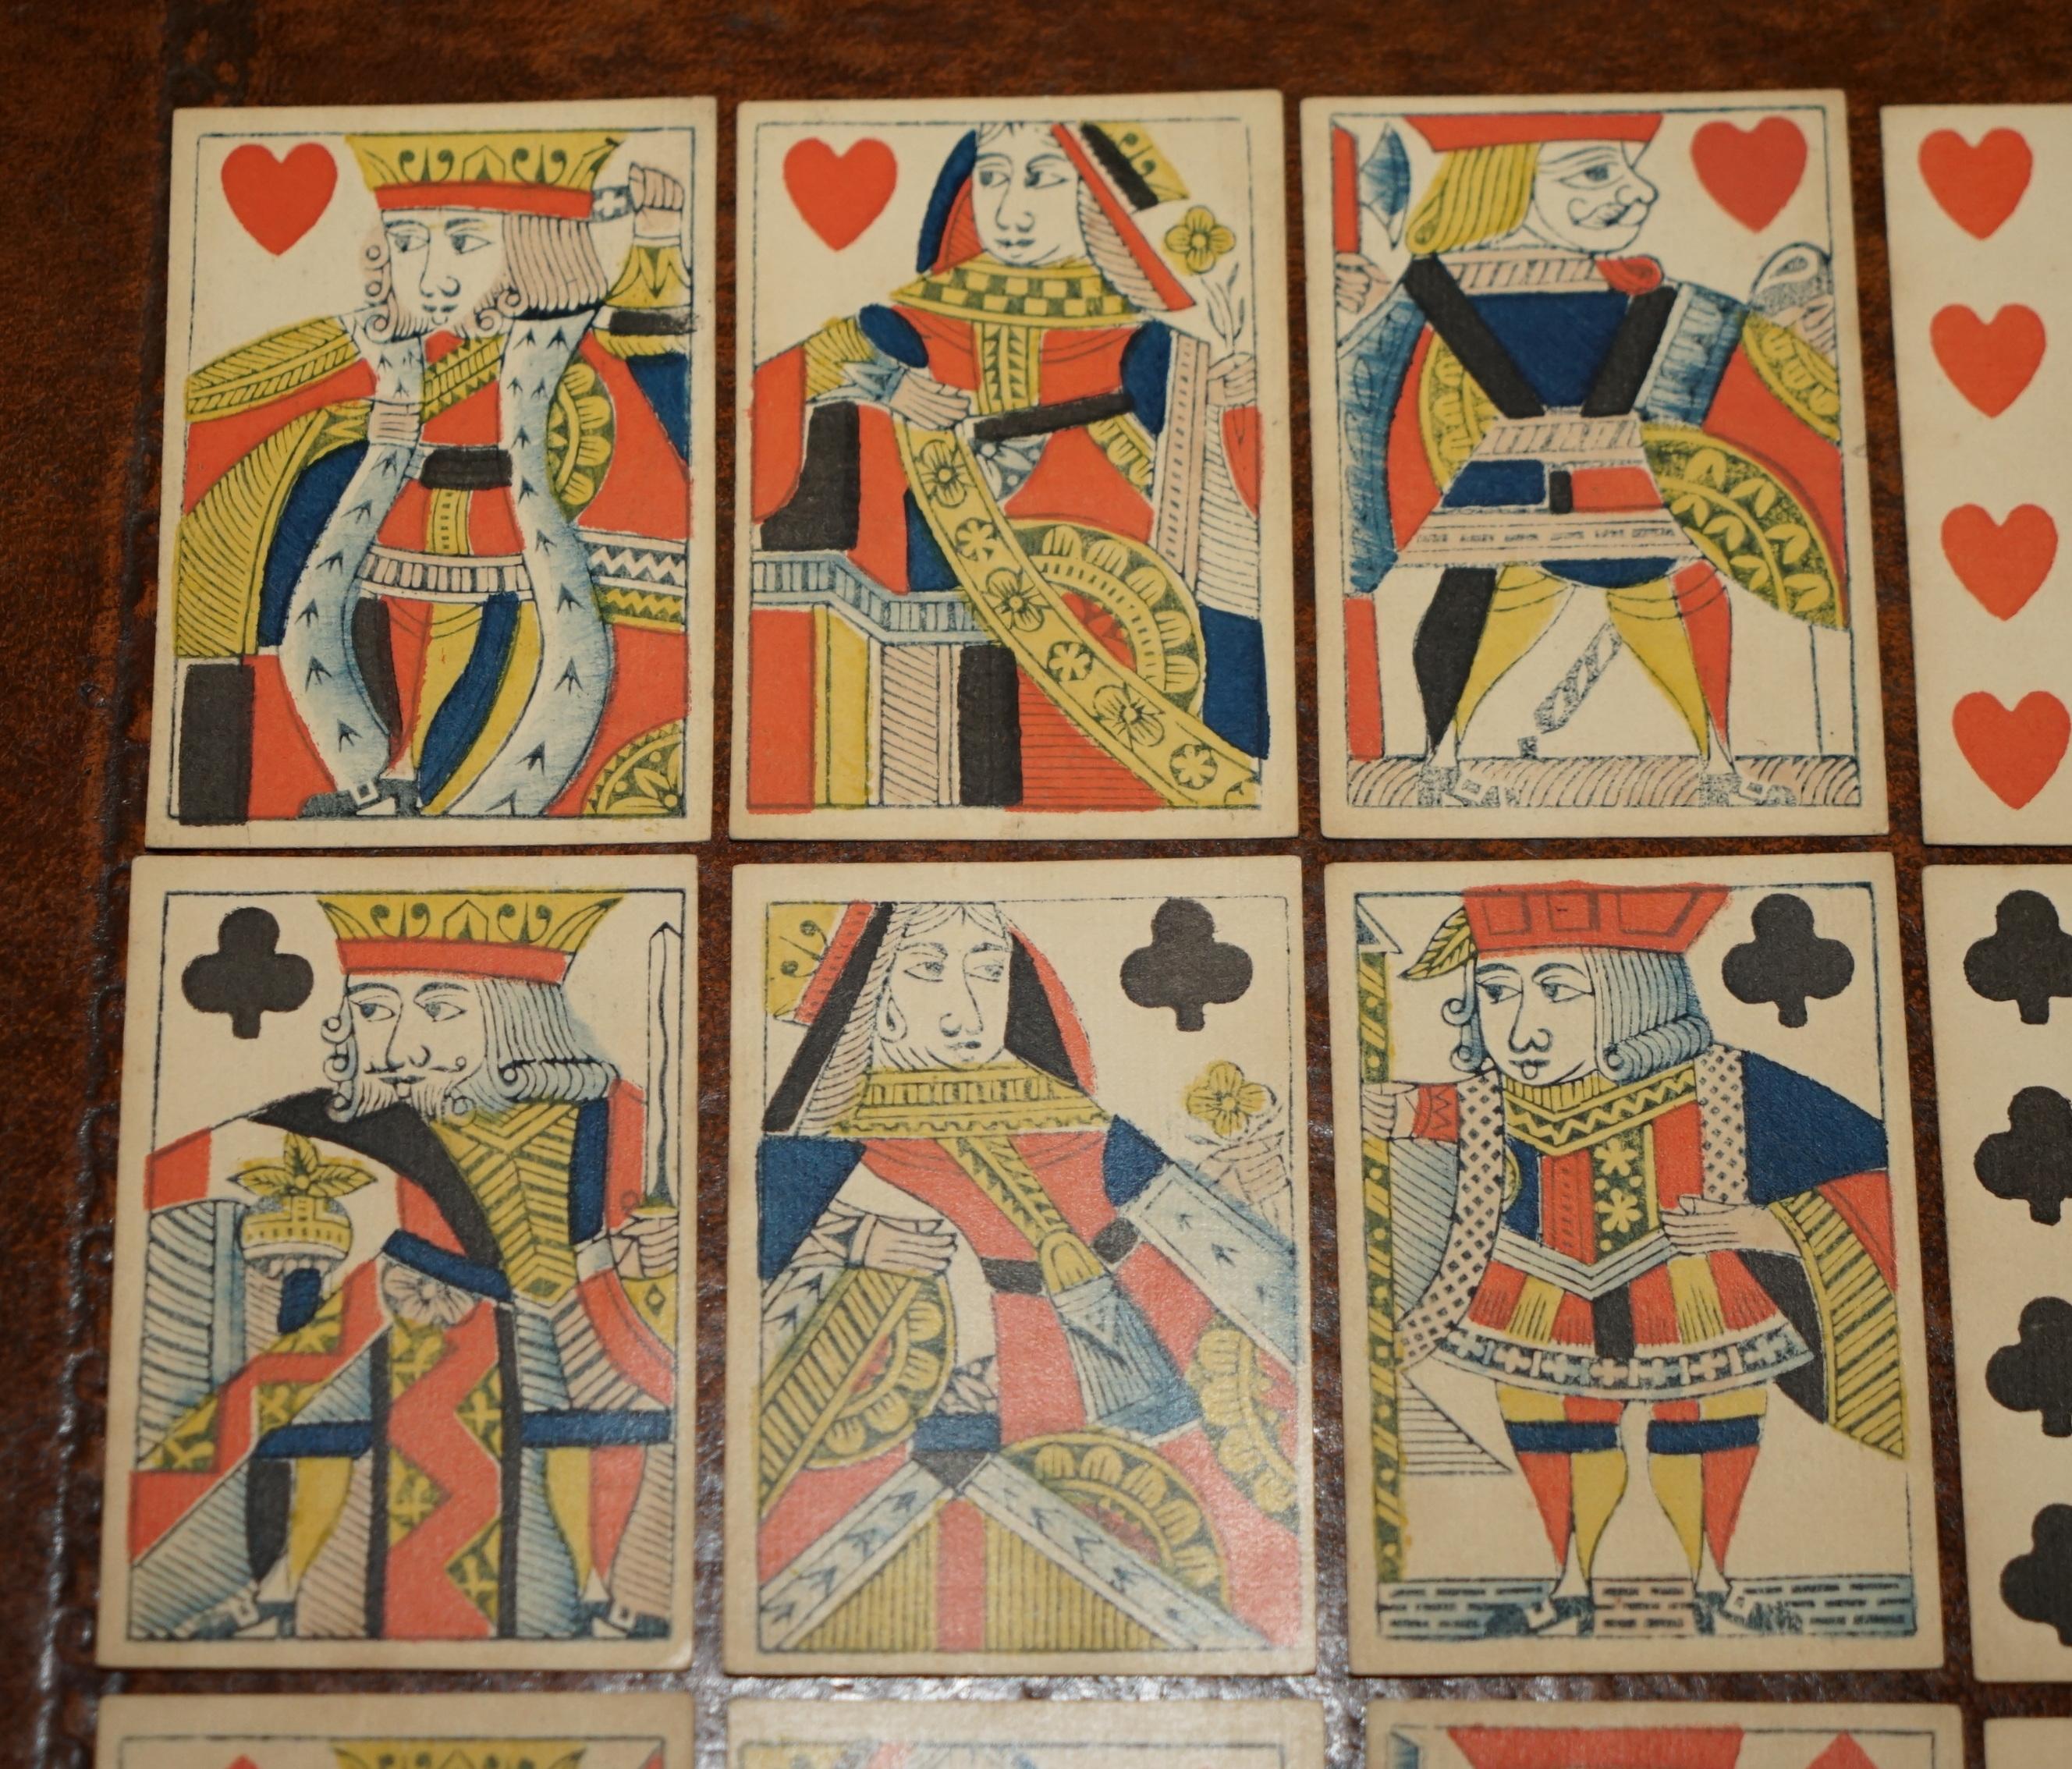 ANTIQUE 1830 THOMAS CRESWICK GEORGIAN PLAYiNG CARDS MIT FIZZLE ACE OF SPADES (Englisch) im Angebot